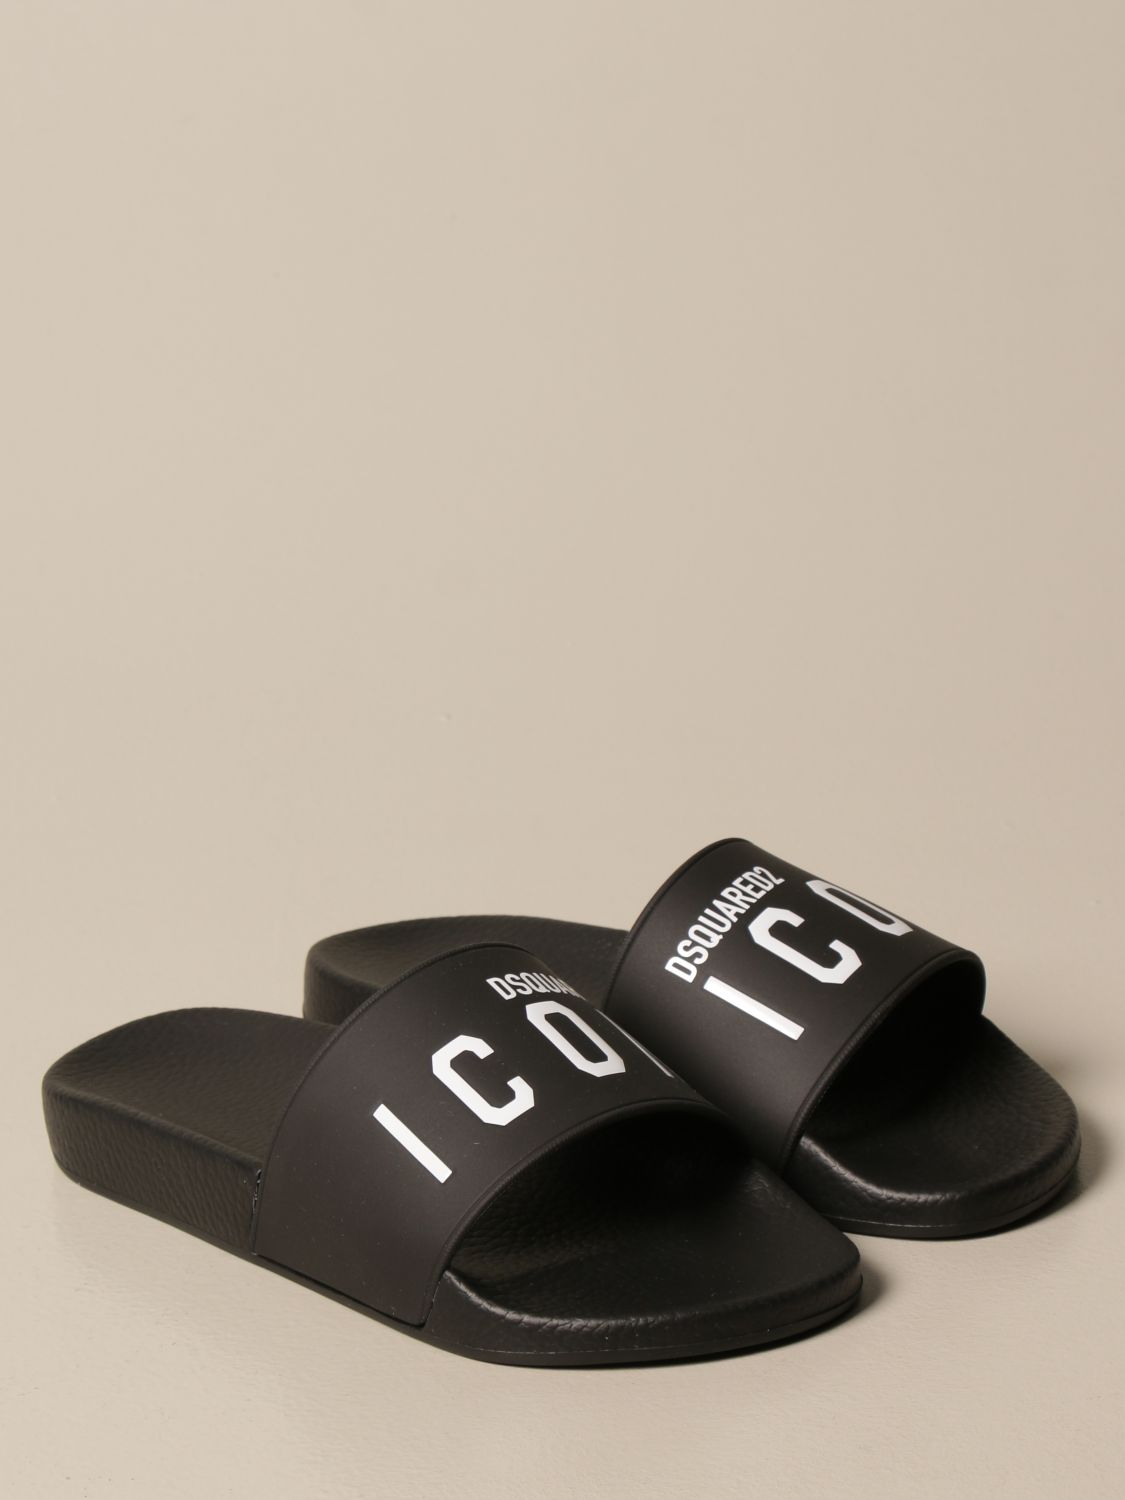 DSQUARED2: rubber sandal with Icon print - Black | Dsquared2 flat